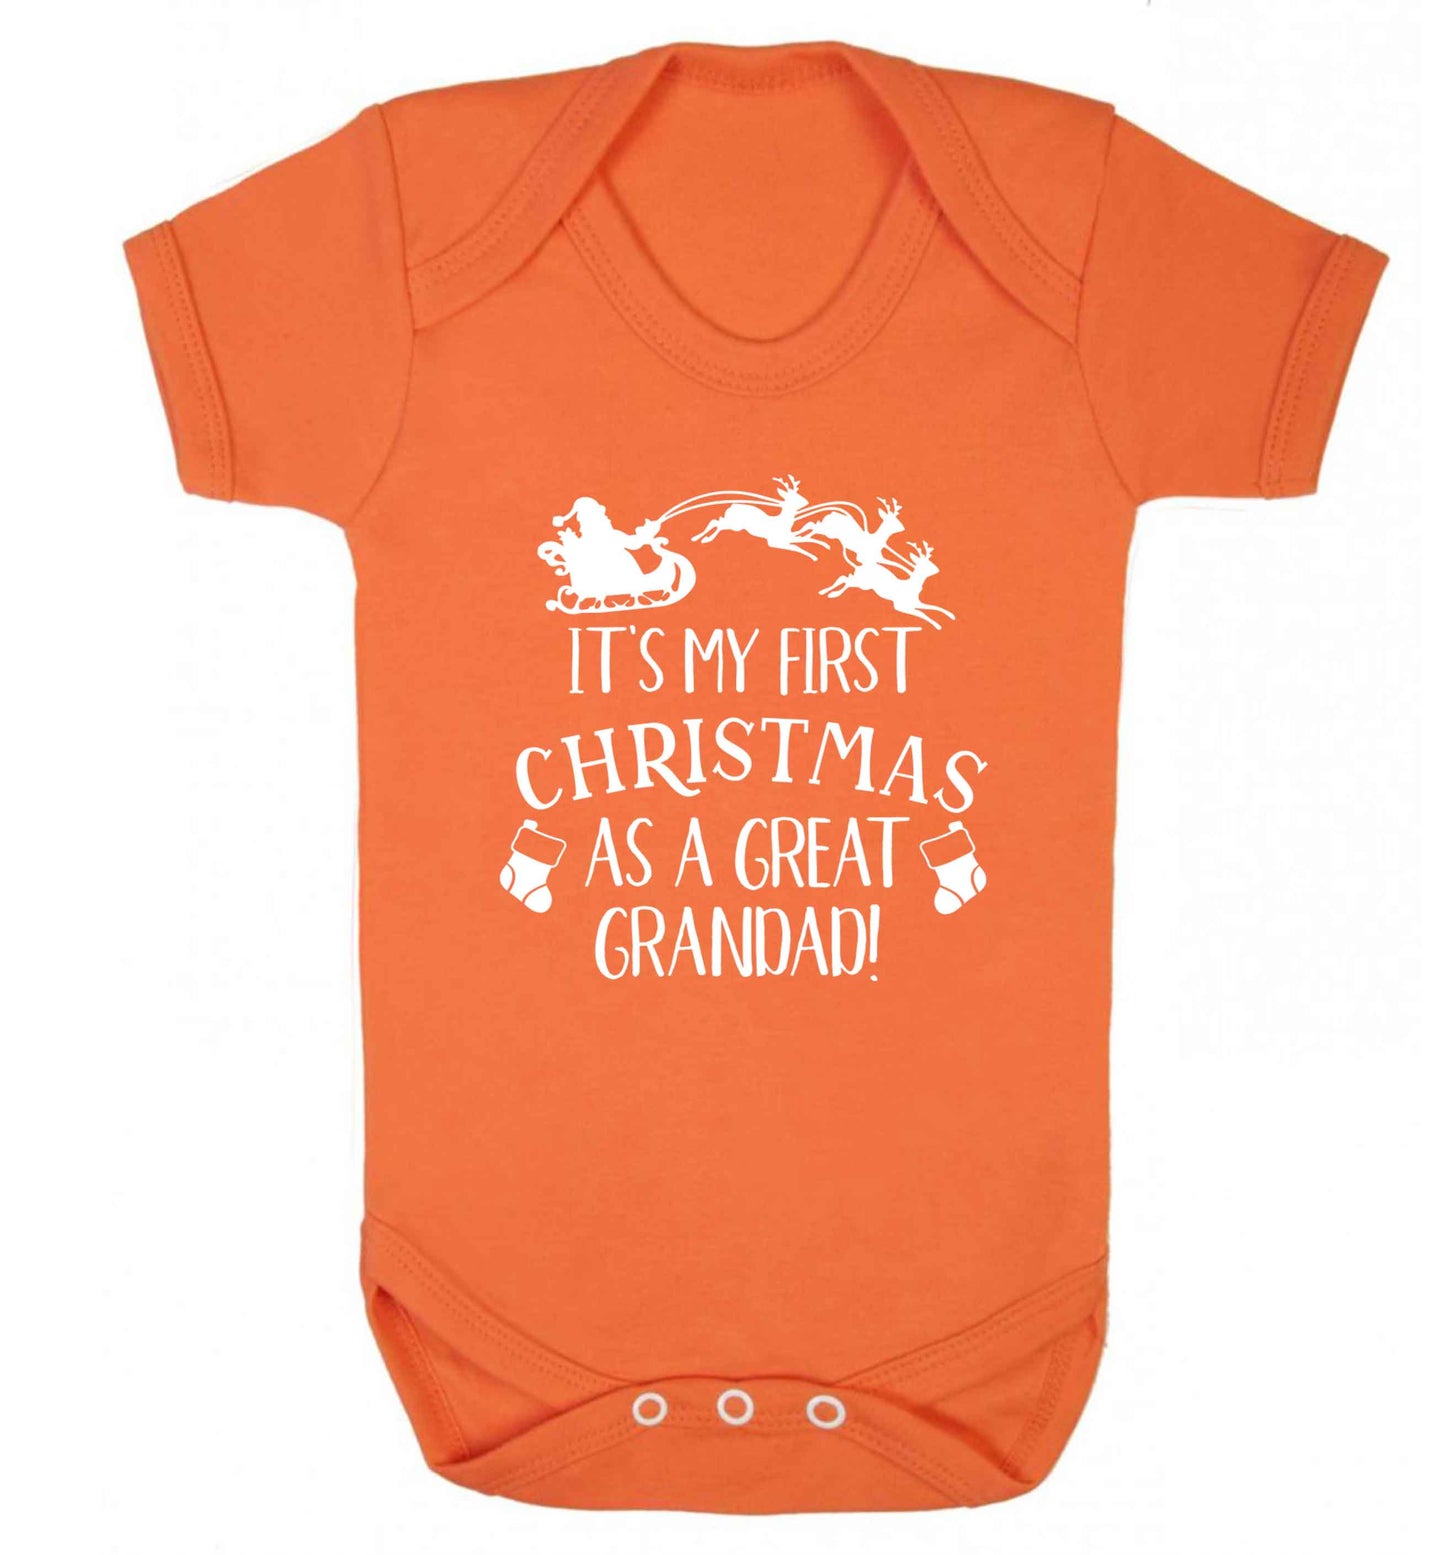 It's my first Christmas as a great grandad! Baby Vest orange 18-24 months